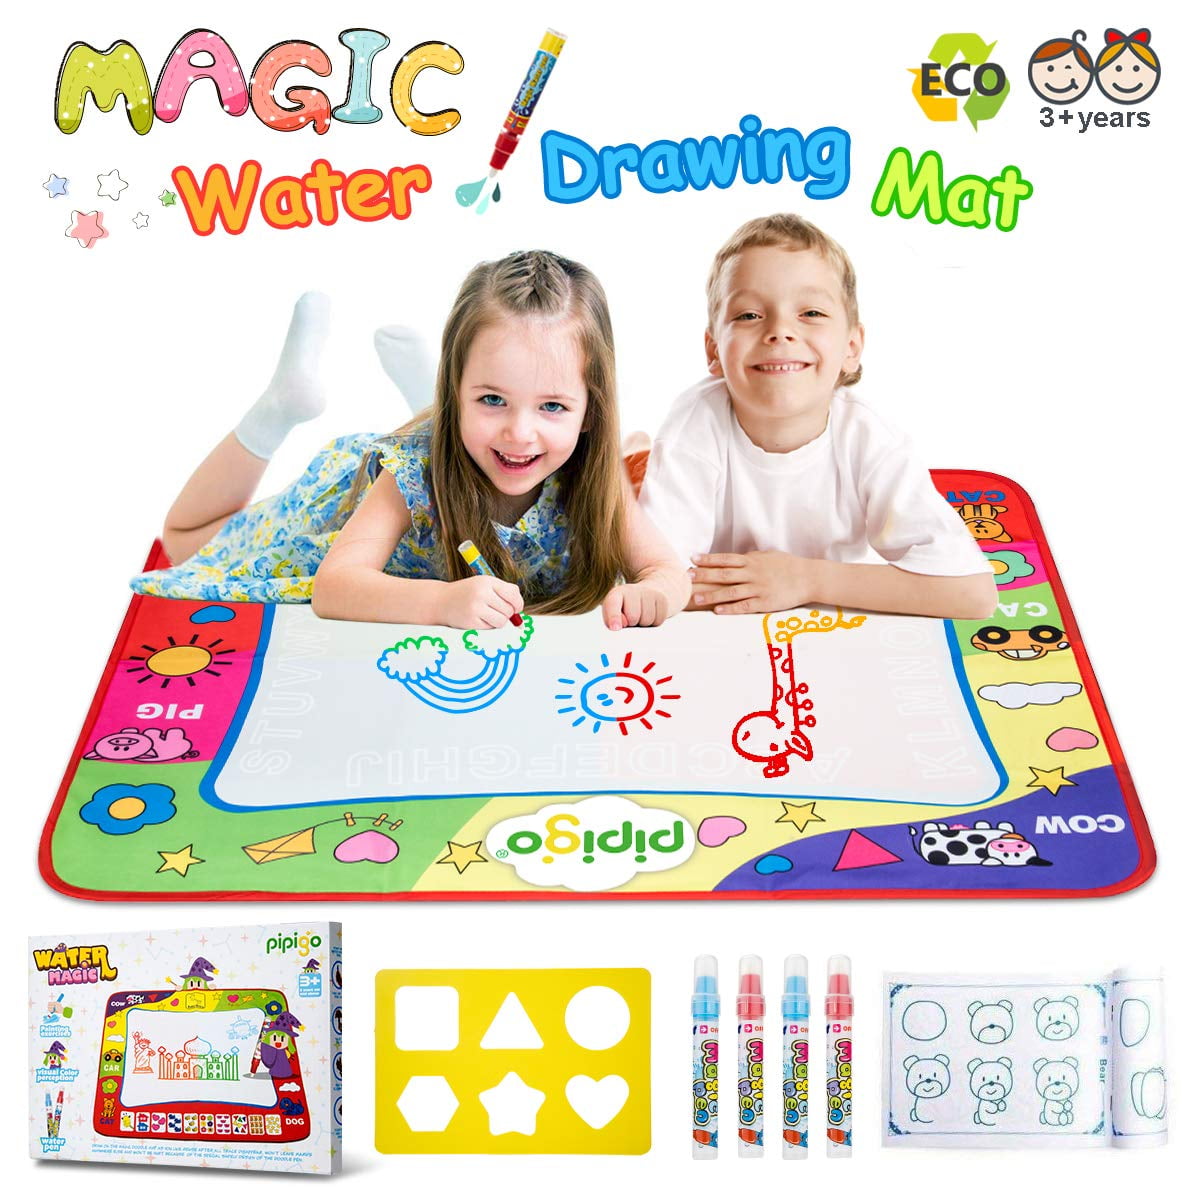 AR Products Magic Water Painting Doodle Large Mat for Kids Toddler Boys Girls Educational Learning Pad with Pens Molds Drawing Booklet Gift for Ages 2,3,4,5,6 Year Old